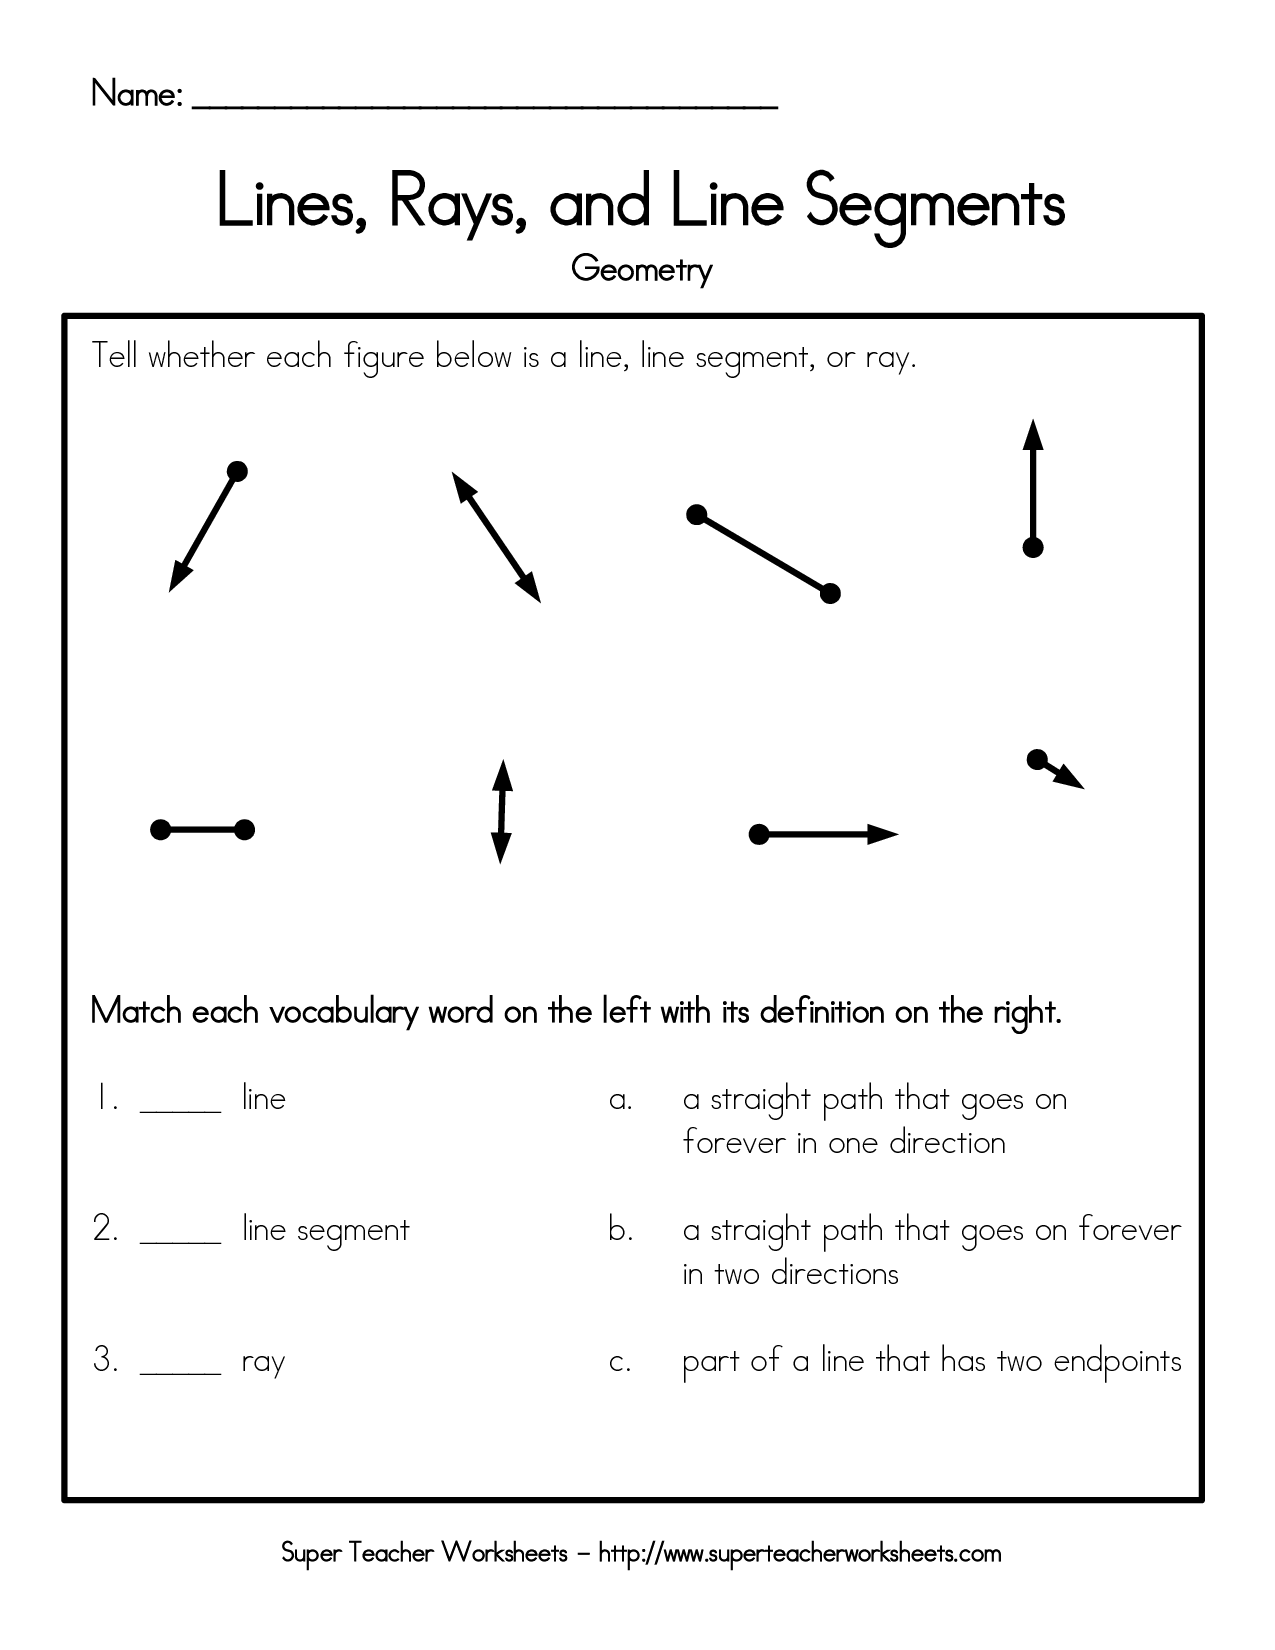 Lines Rays And Line Segments Worksheet Name Lines Rays And Line